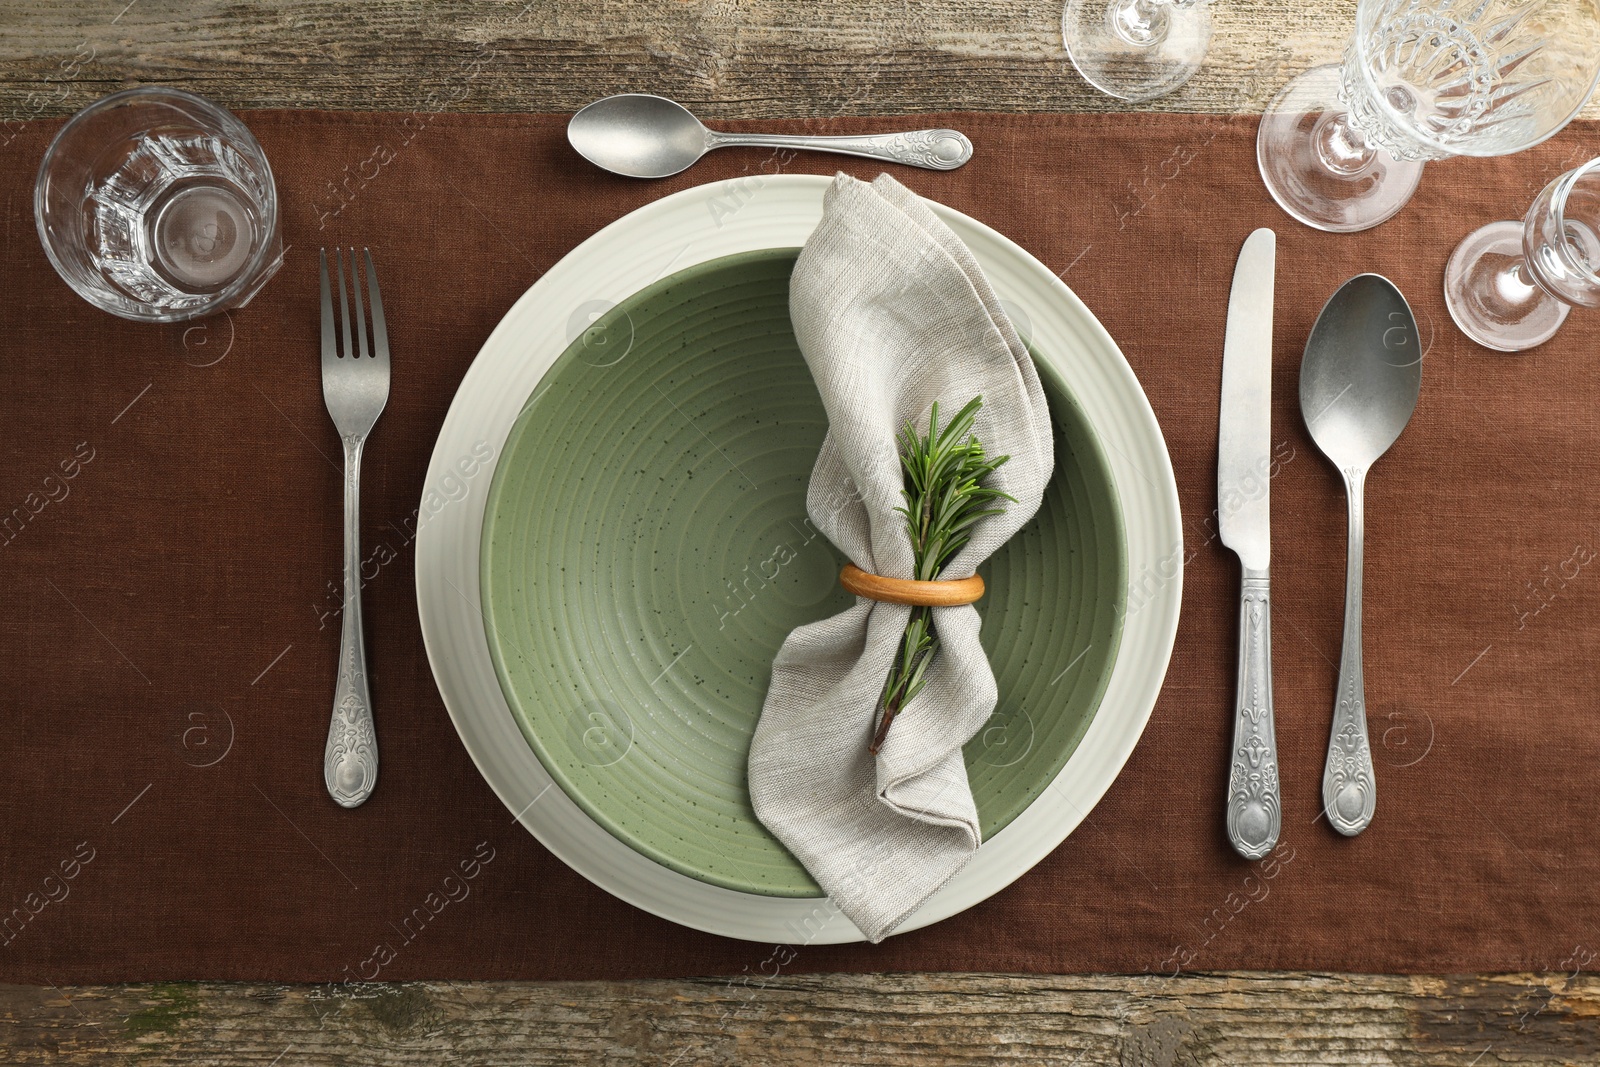 Photo of Stylish setting with cutlery, glasses, plate and bowl on wooden table, flat lay